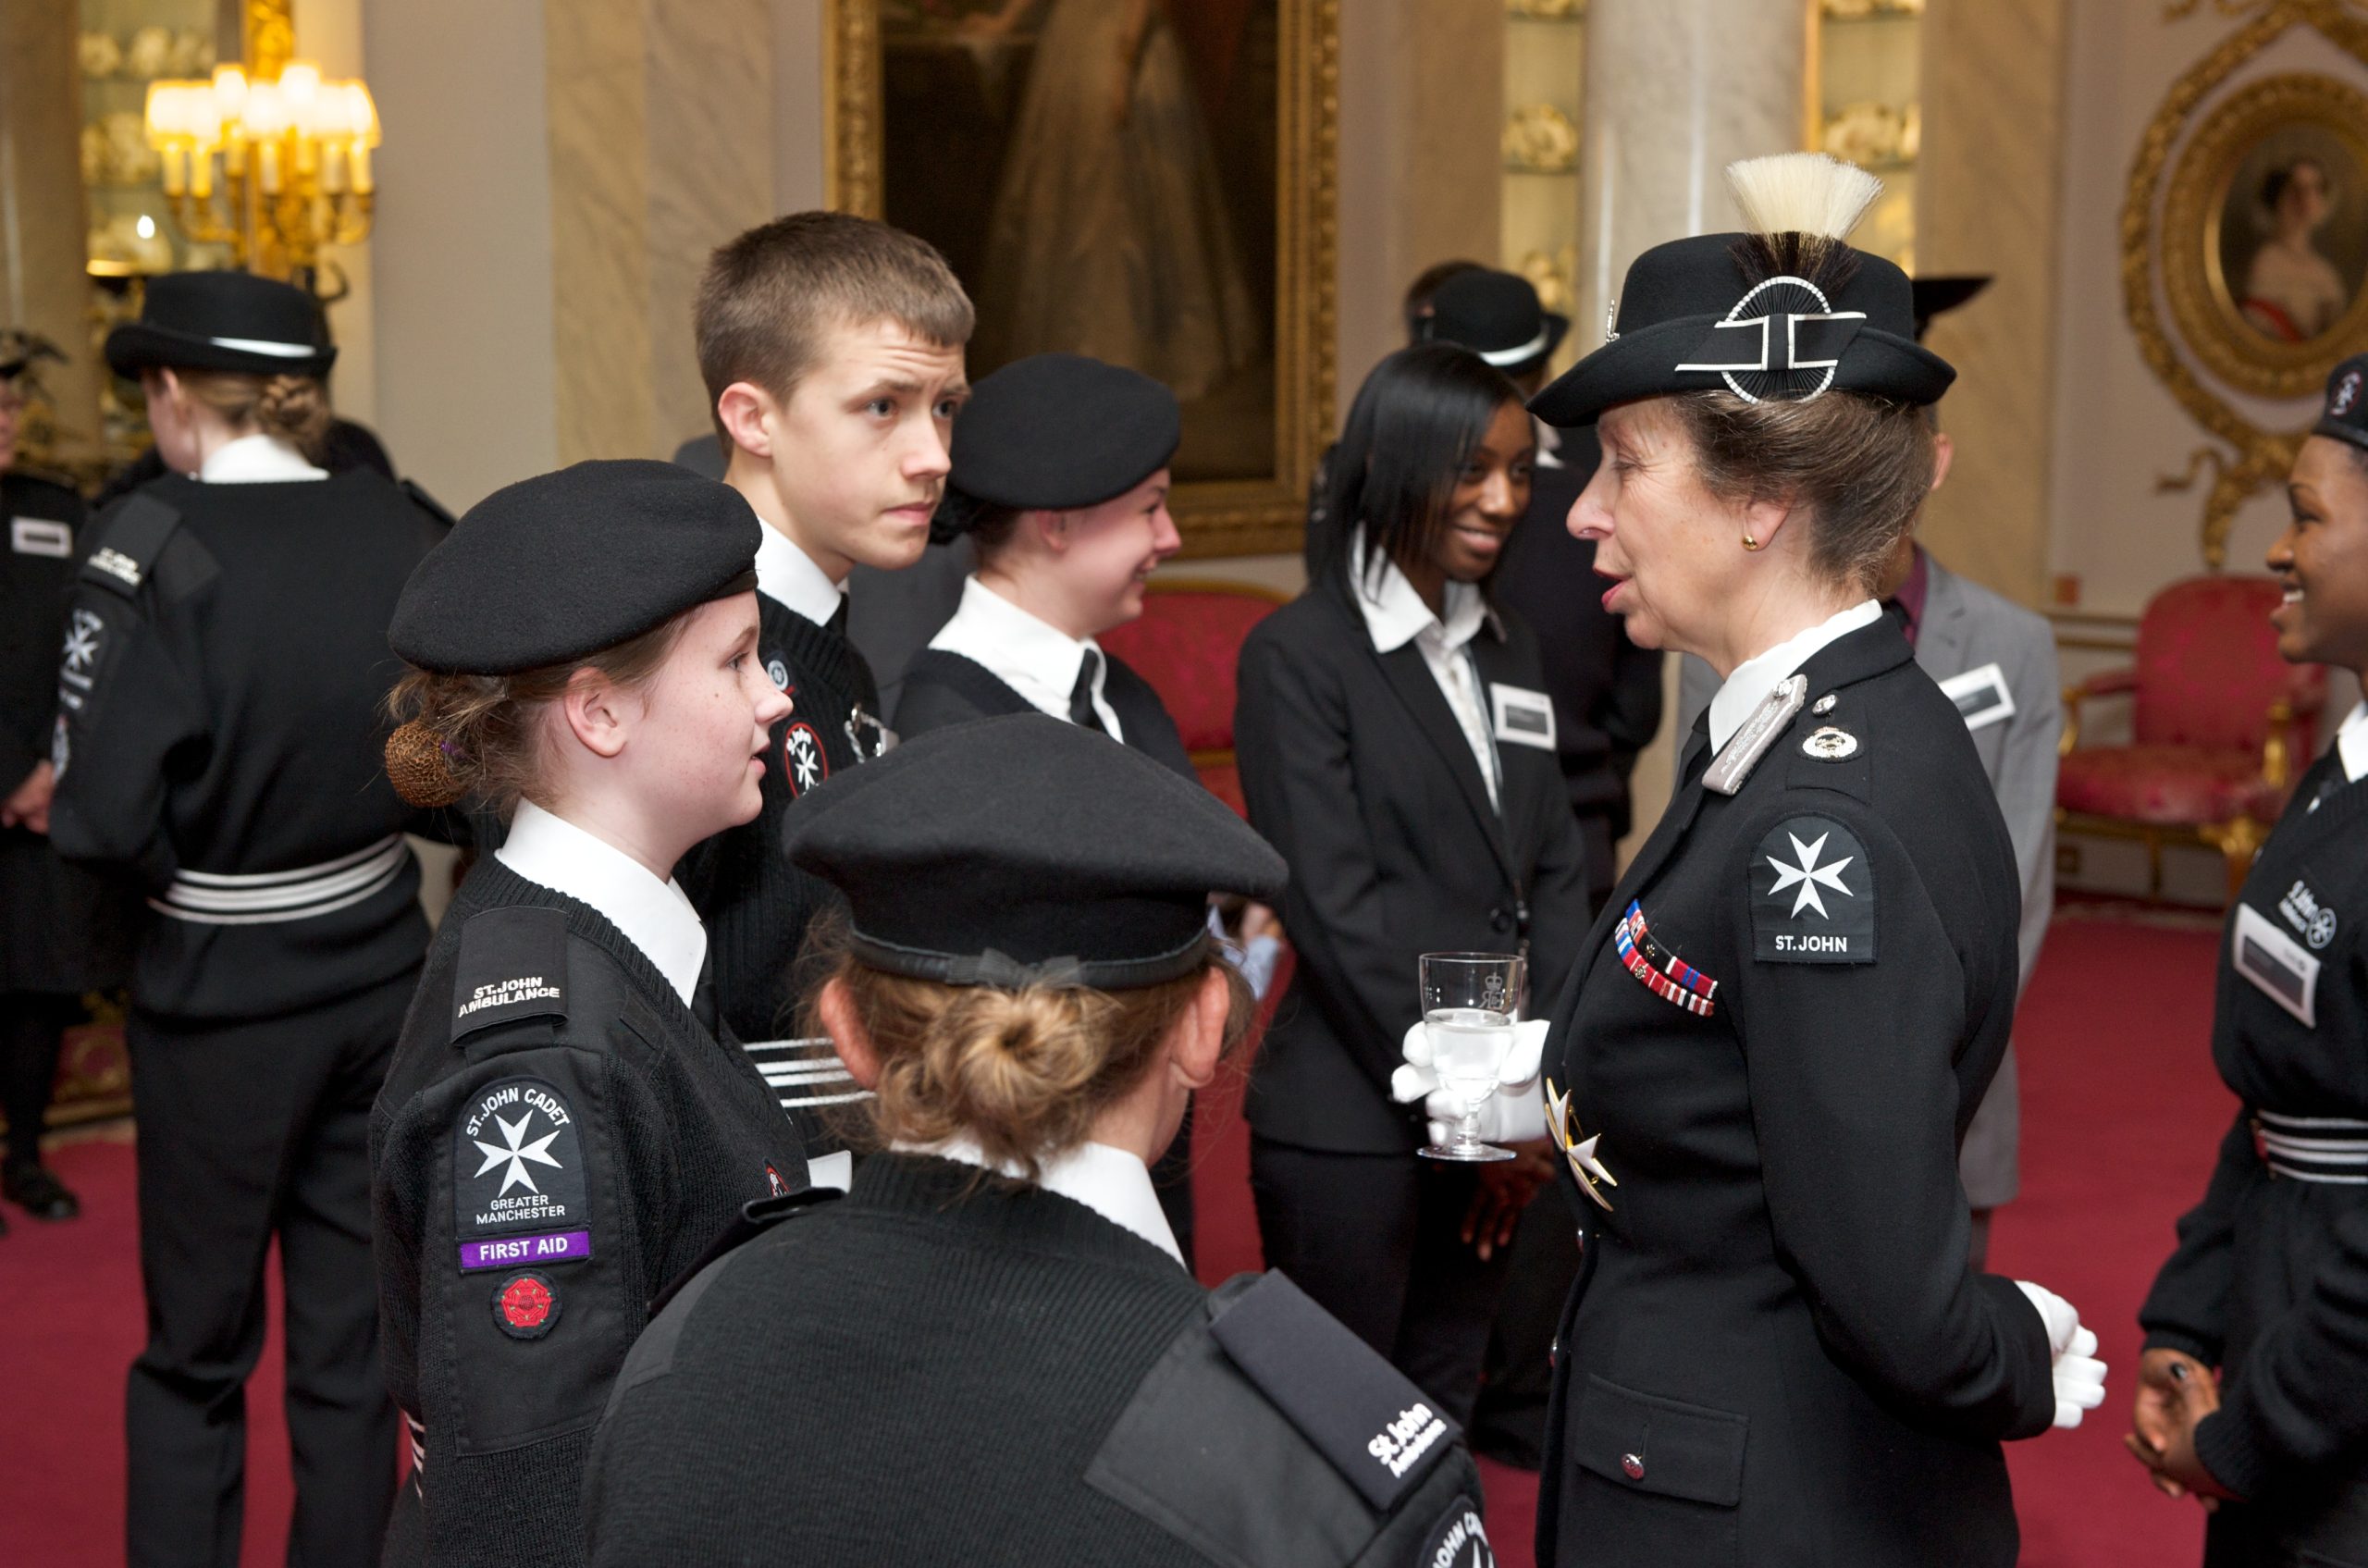 Group of Cadets in black and white St John uniform stand as they meet Princess Anne, also wearing St John uniform.